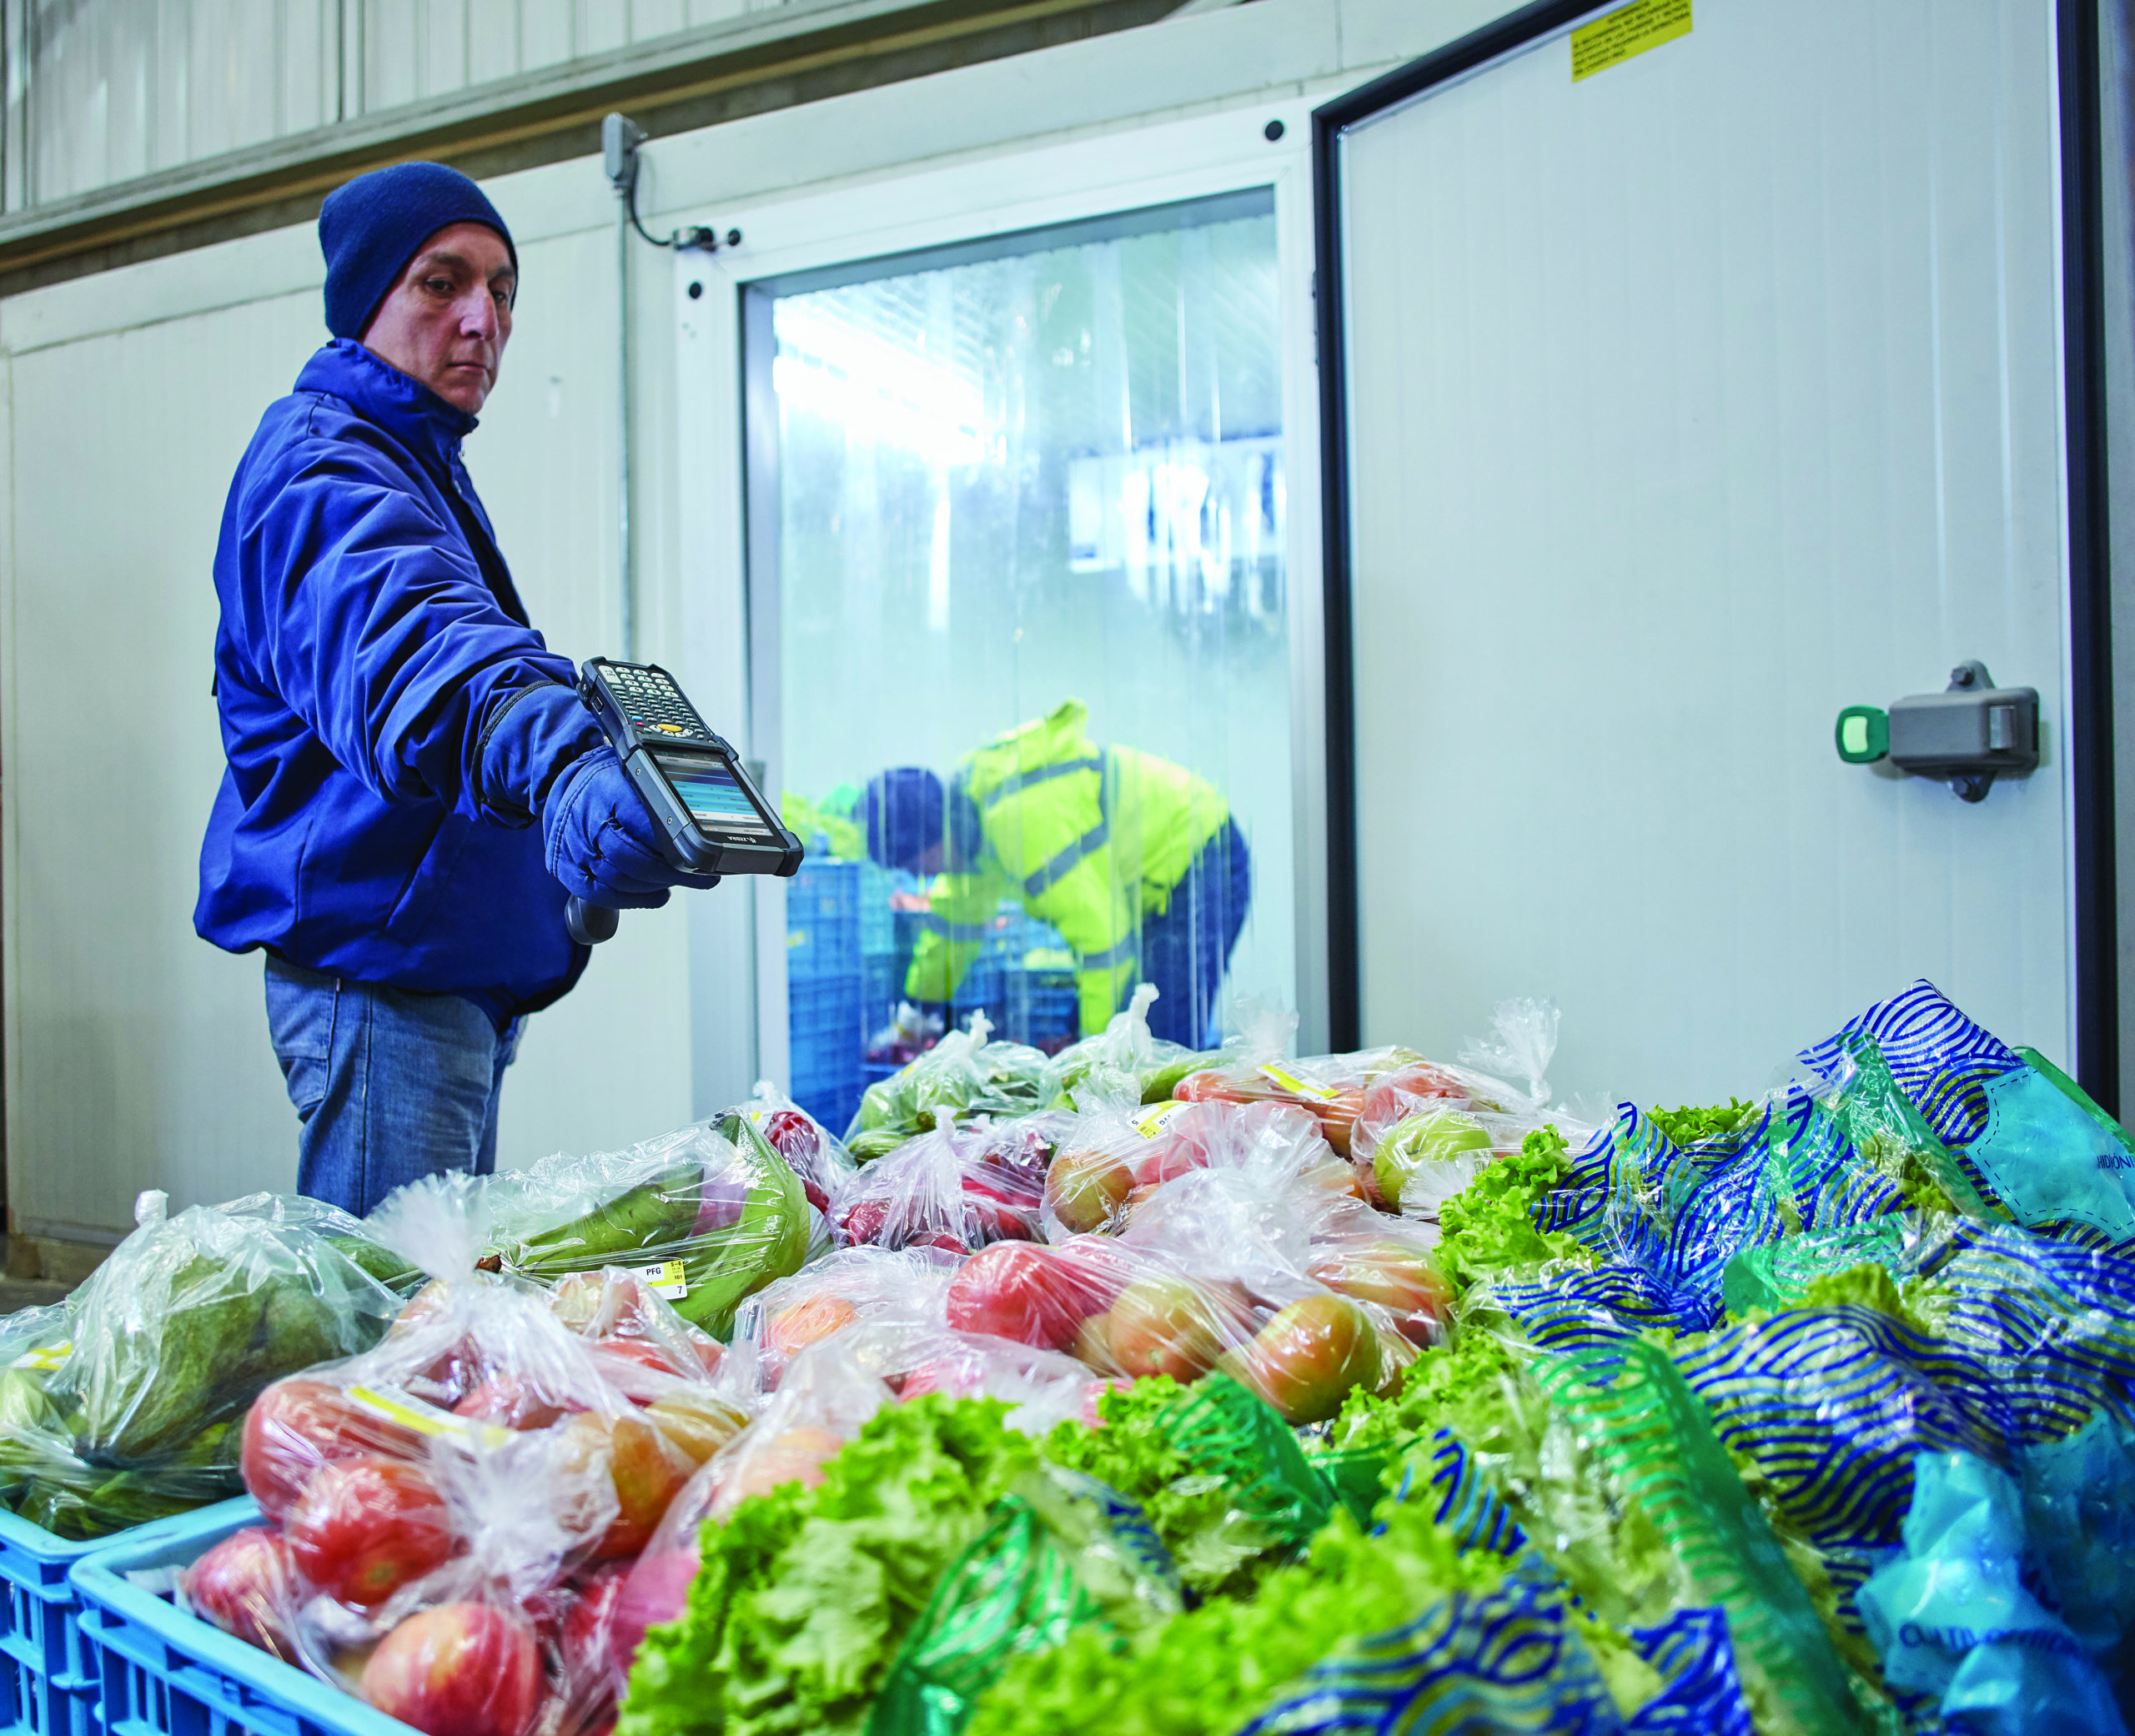 pallet of produce scanned by worker in cold storage